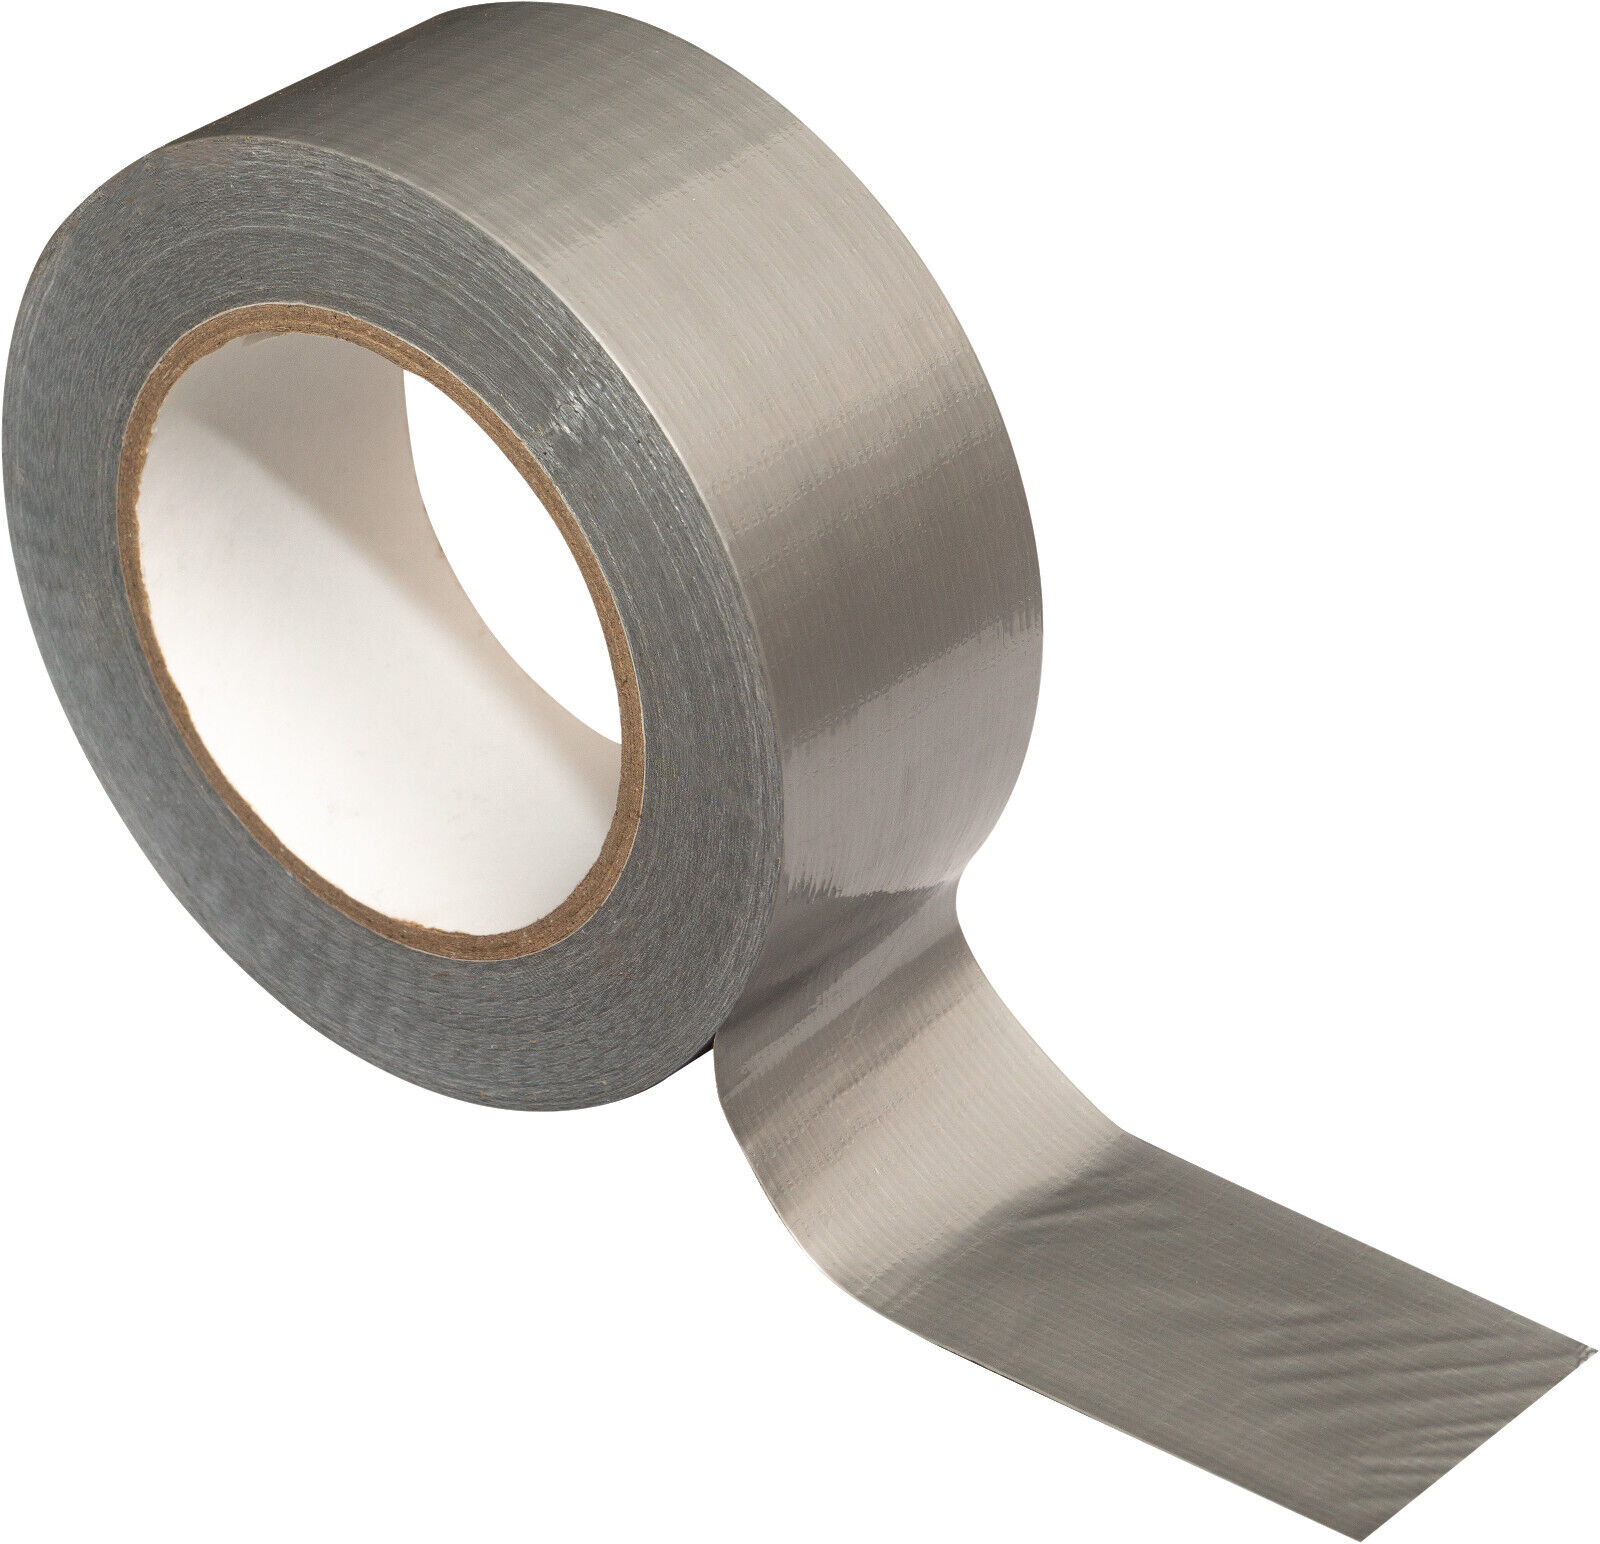 General Purpose Duct Tape 50mm x 50m Silver